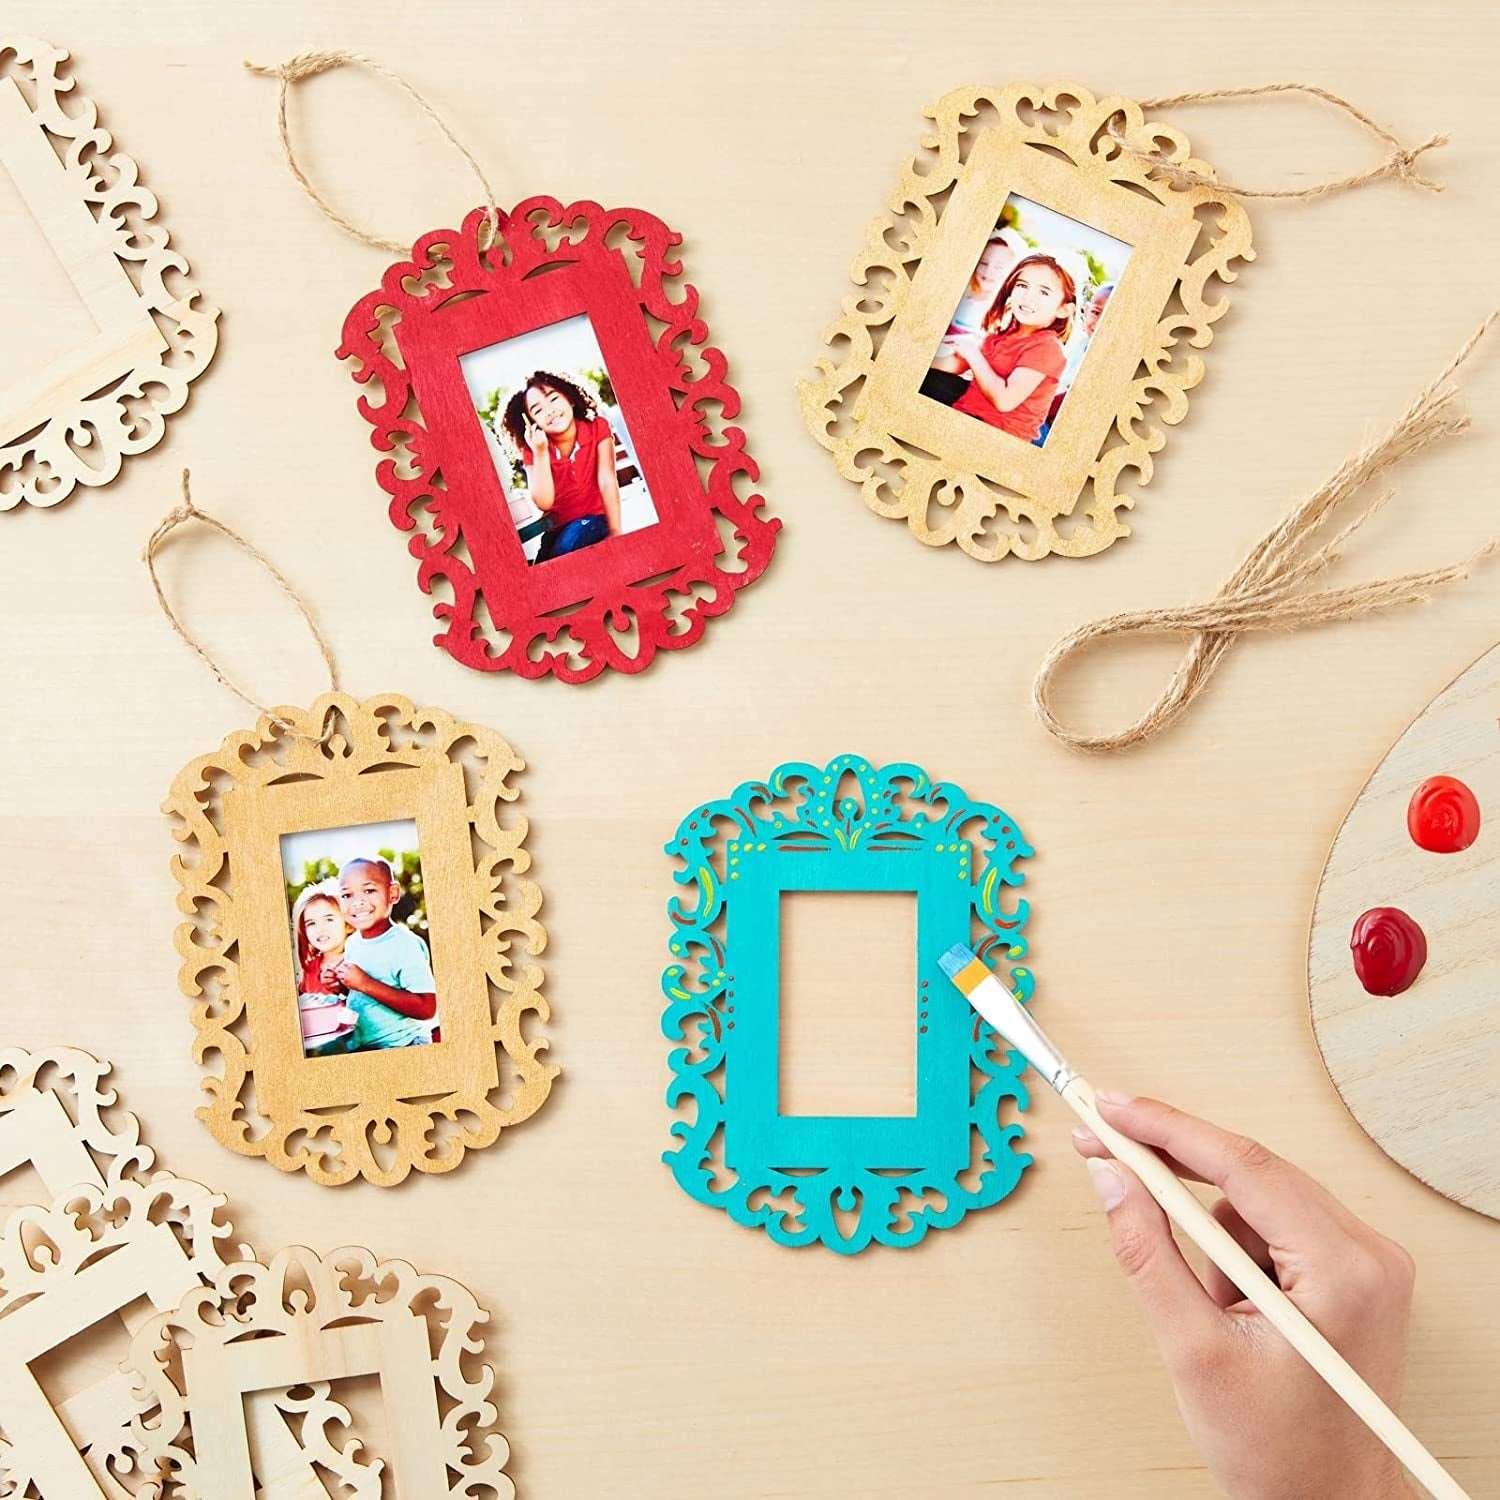 Unfinished Wooden Picture Frames for Crafts - Unfinished Wood Frames with Stand Make Your Own Picture Frames Paintable Frames Fits A 4x6 inch Photo